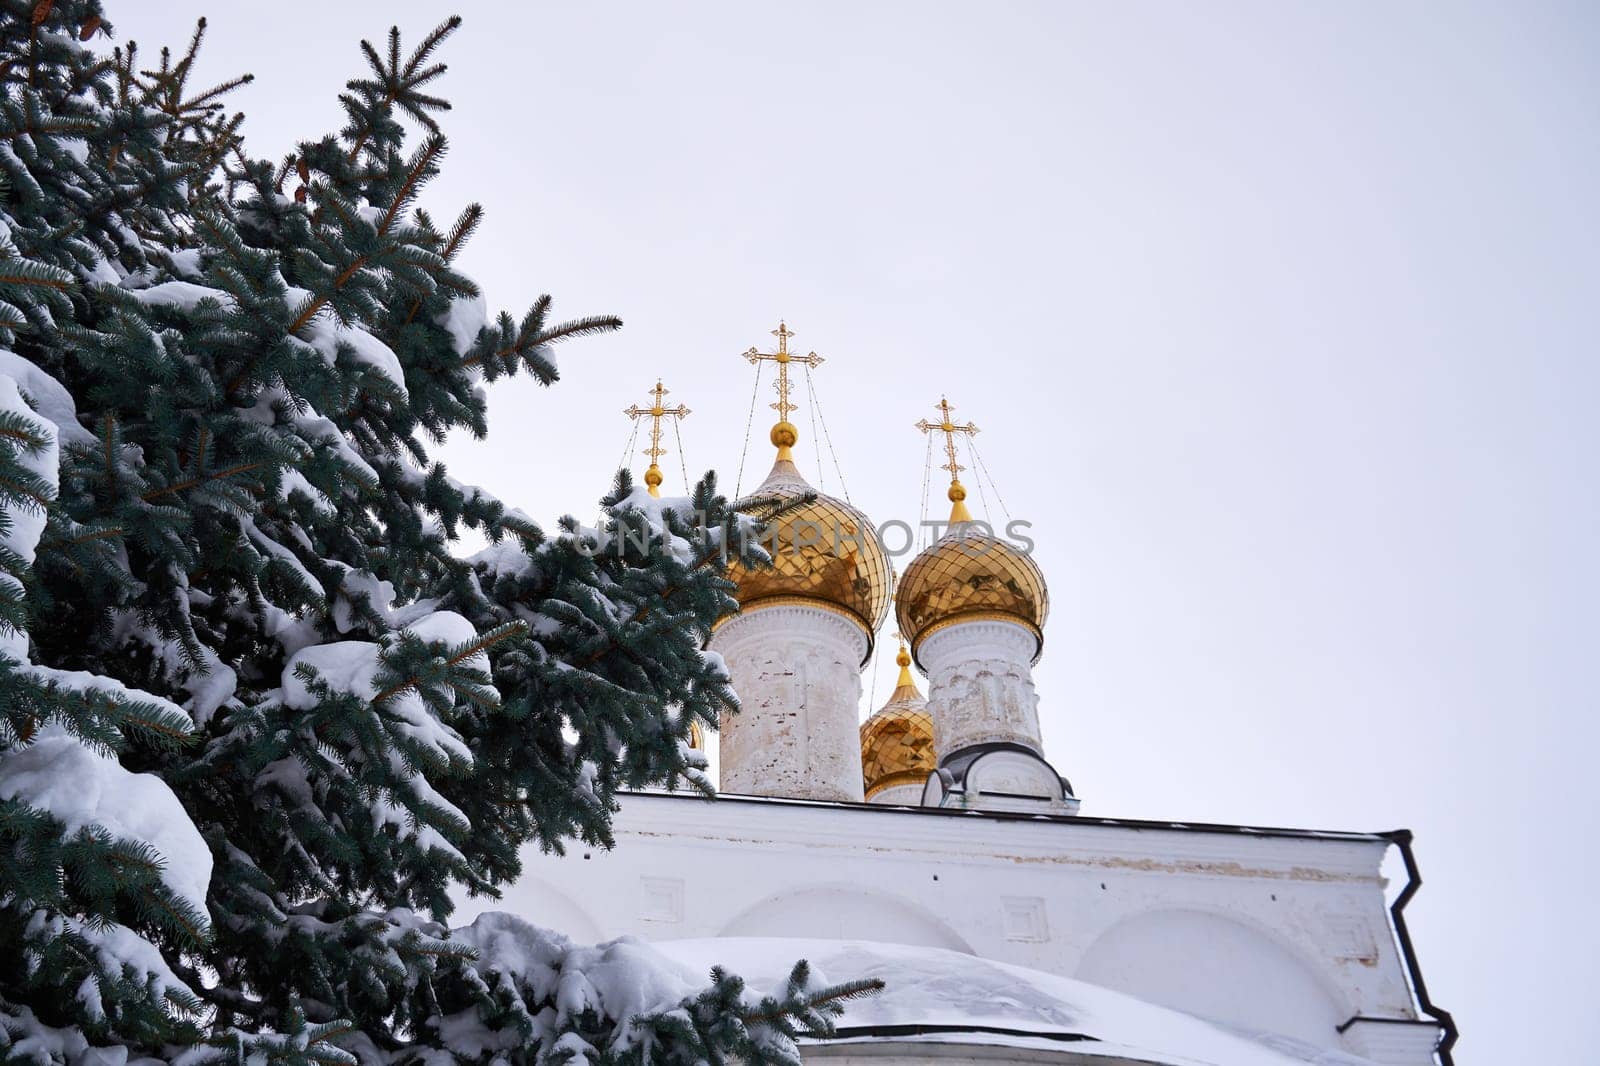 Fir branches covered with snow against the backdrop of an Orthodox Russian church with golden domes